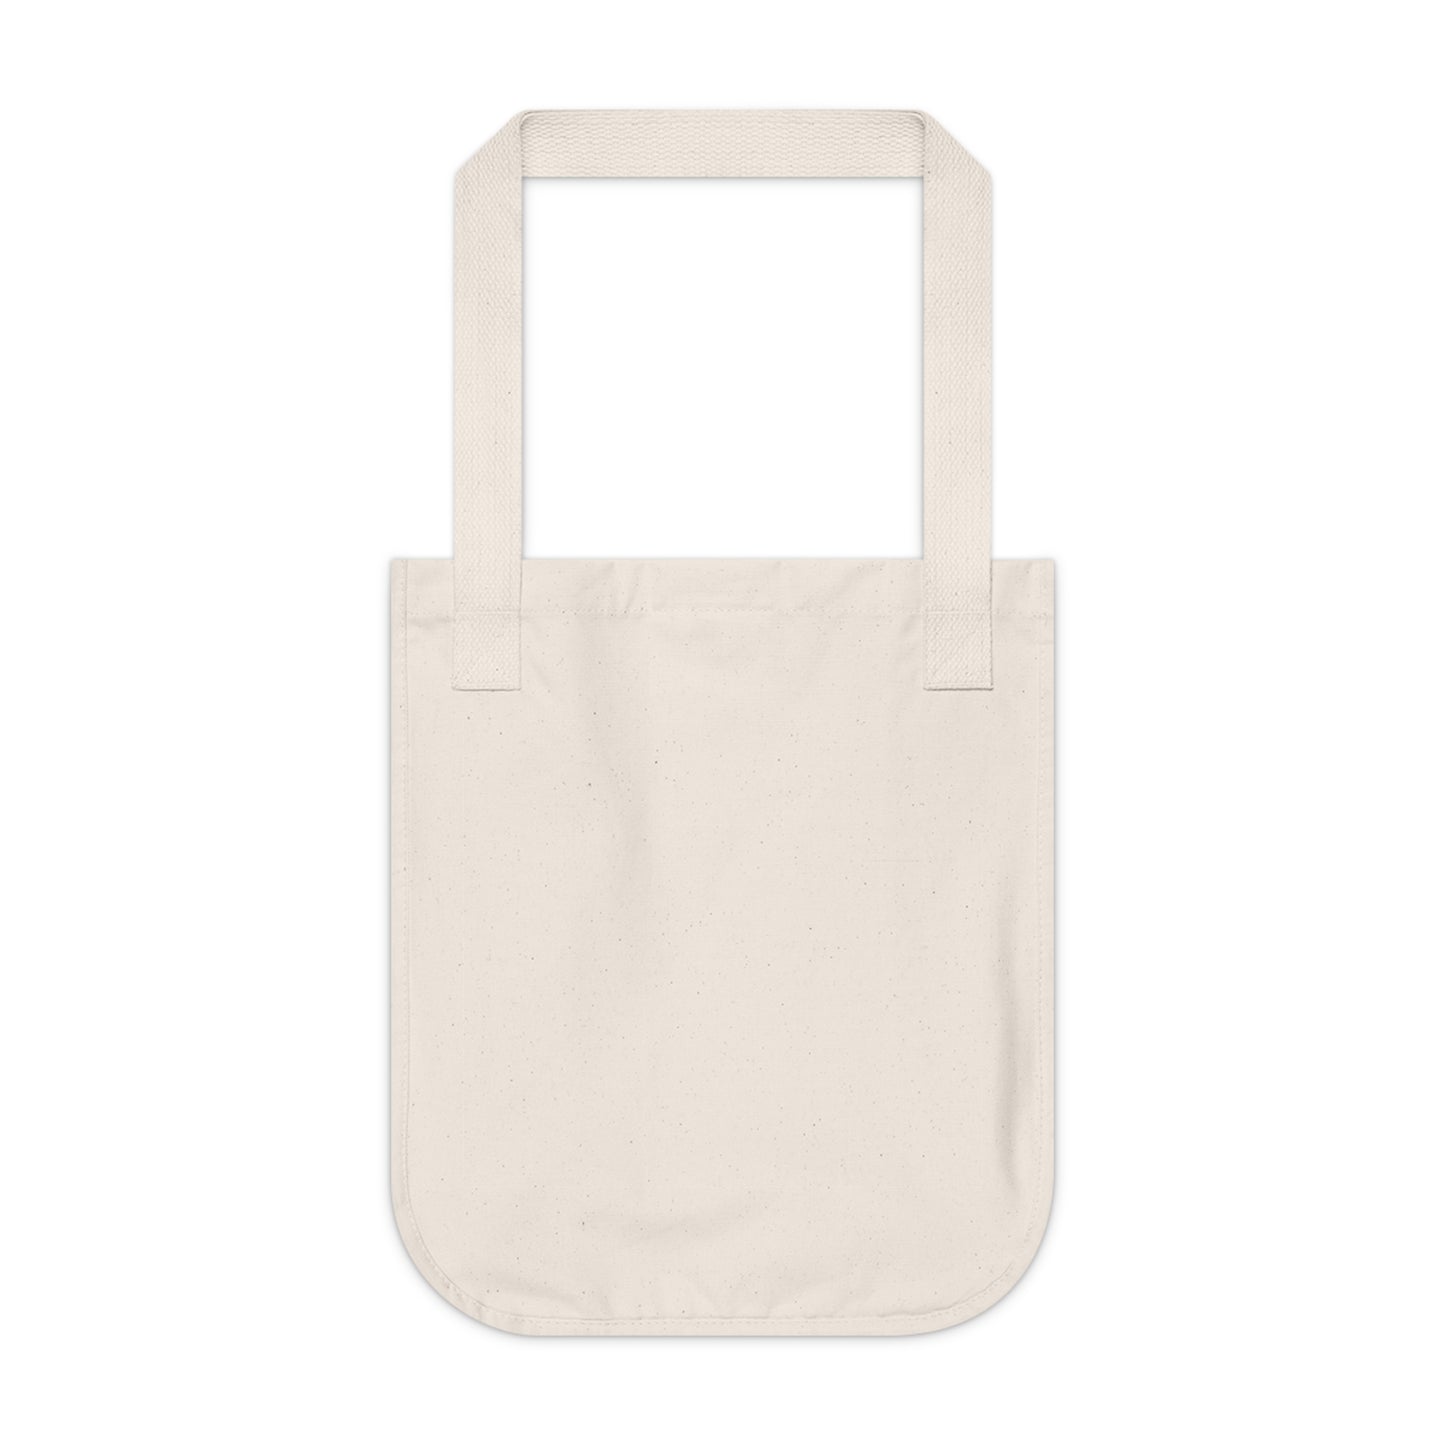 "The Vibrant Wonders of Nature" - Bam Boo! Lifestyle Eco-friendly Tote Bag